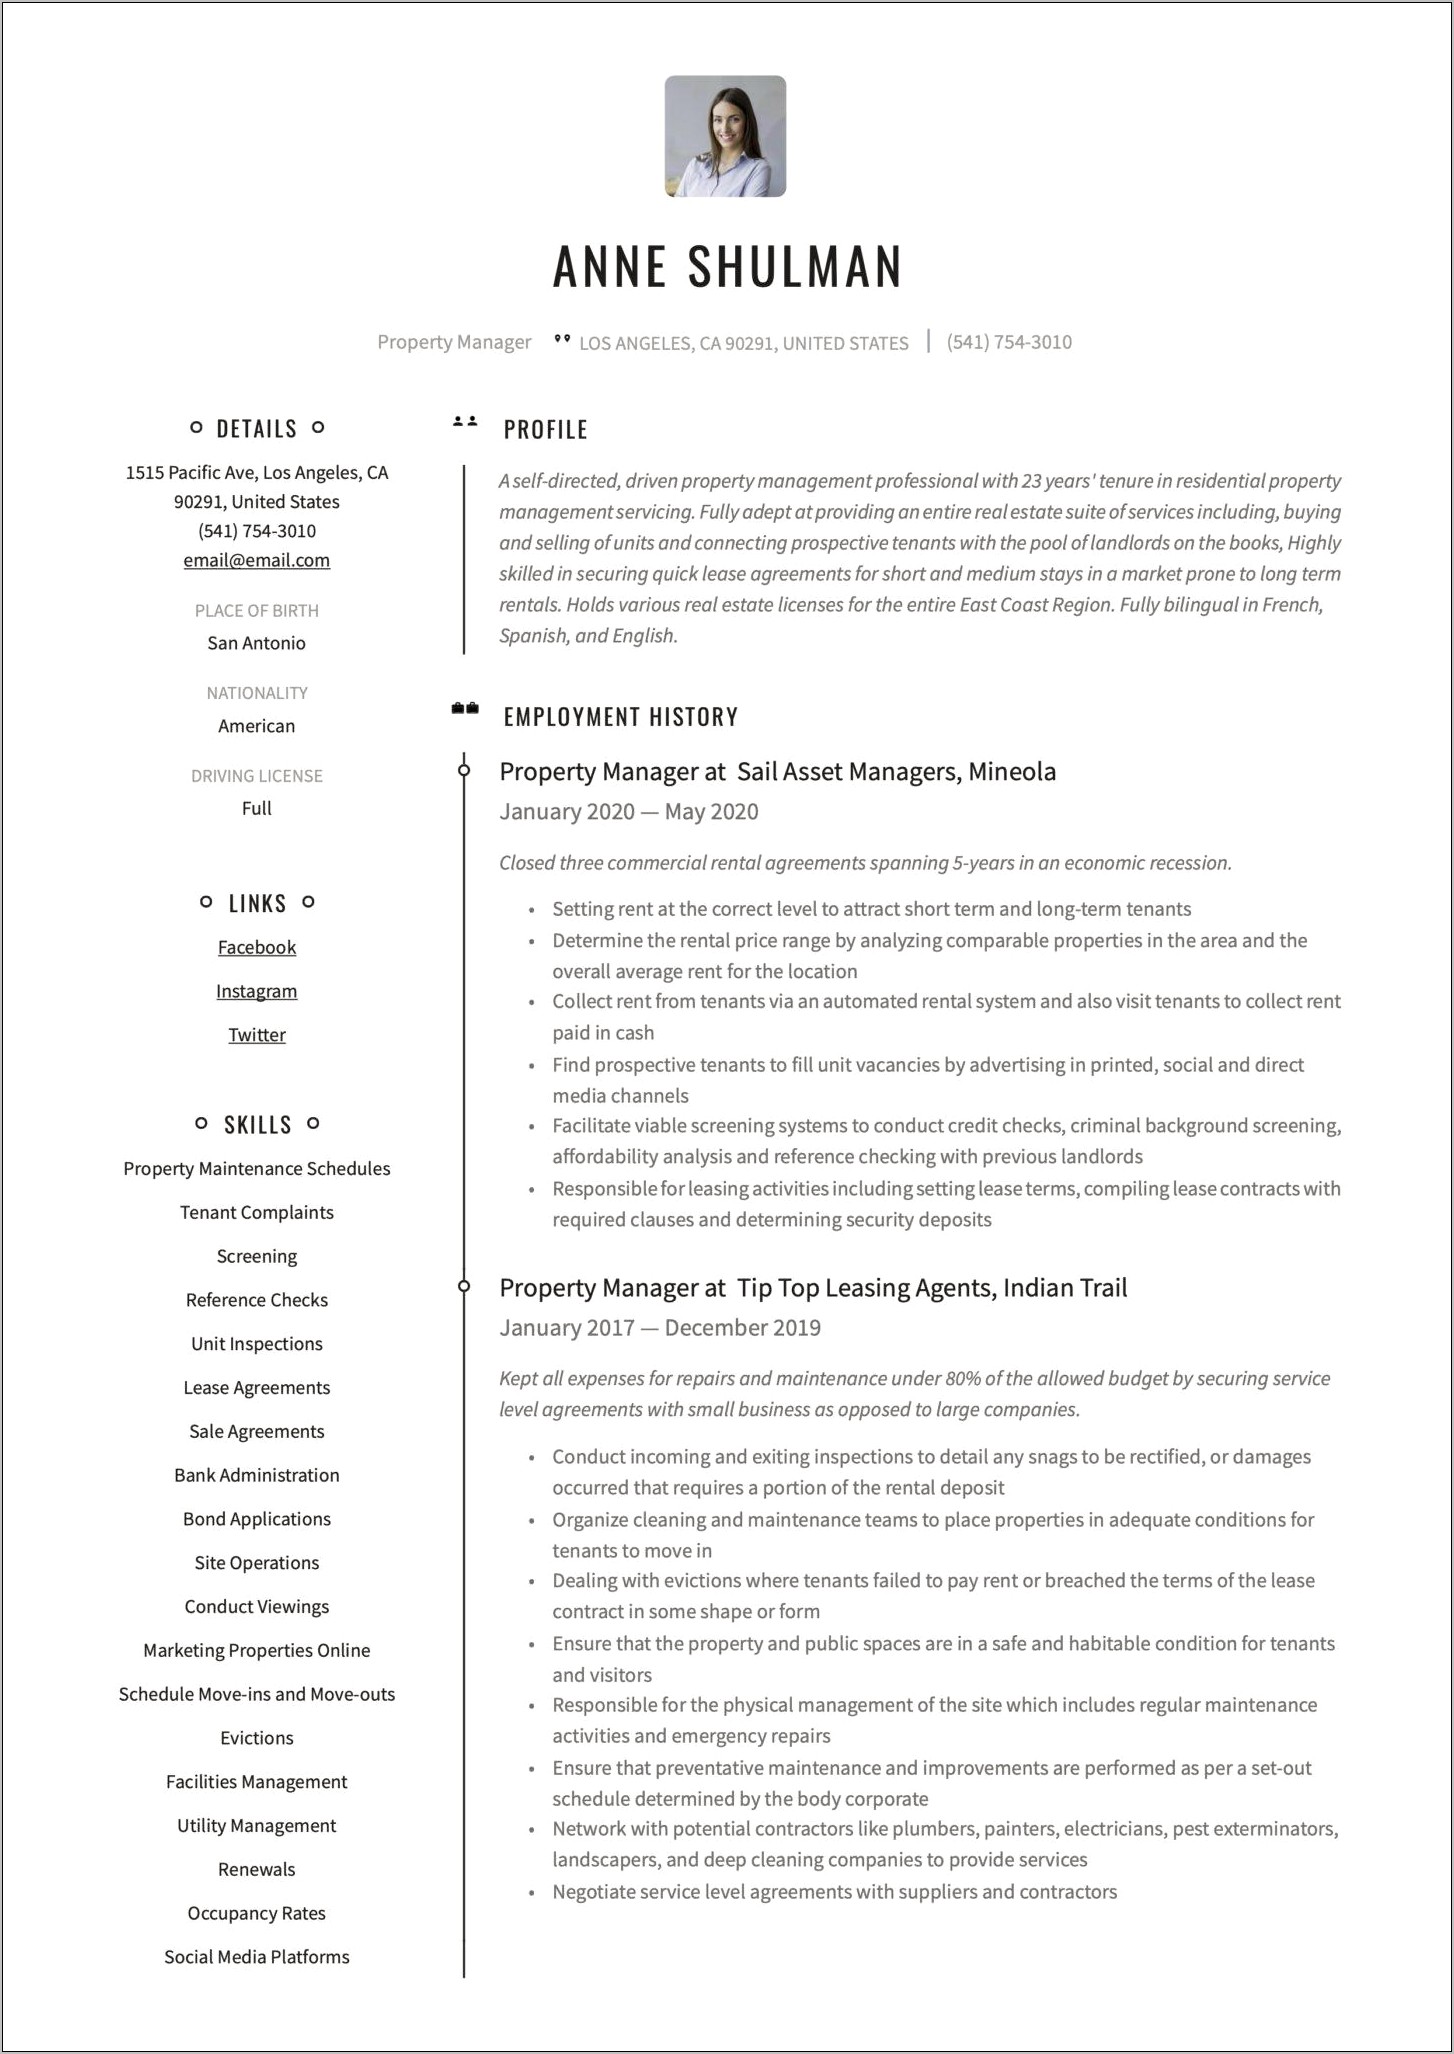 Residential Rental Management Resume Contract